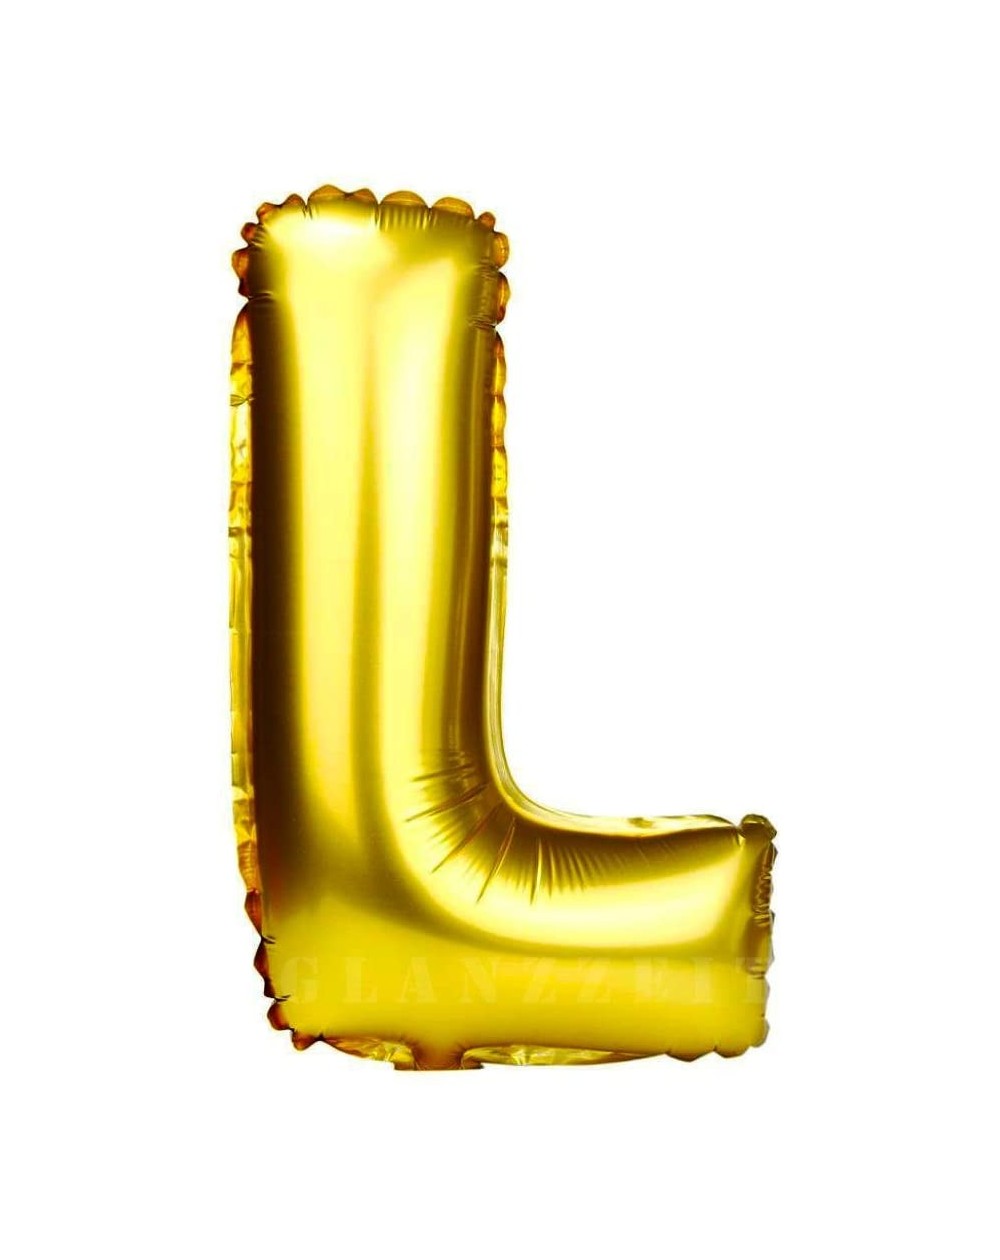 Balloons 32 Inch Gold Foil Balloons Letter A to Z Number 0 to 9 Party Wedding Birthday Decoration (Letter L) - Letter L - CR1...